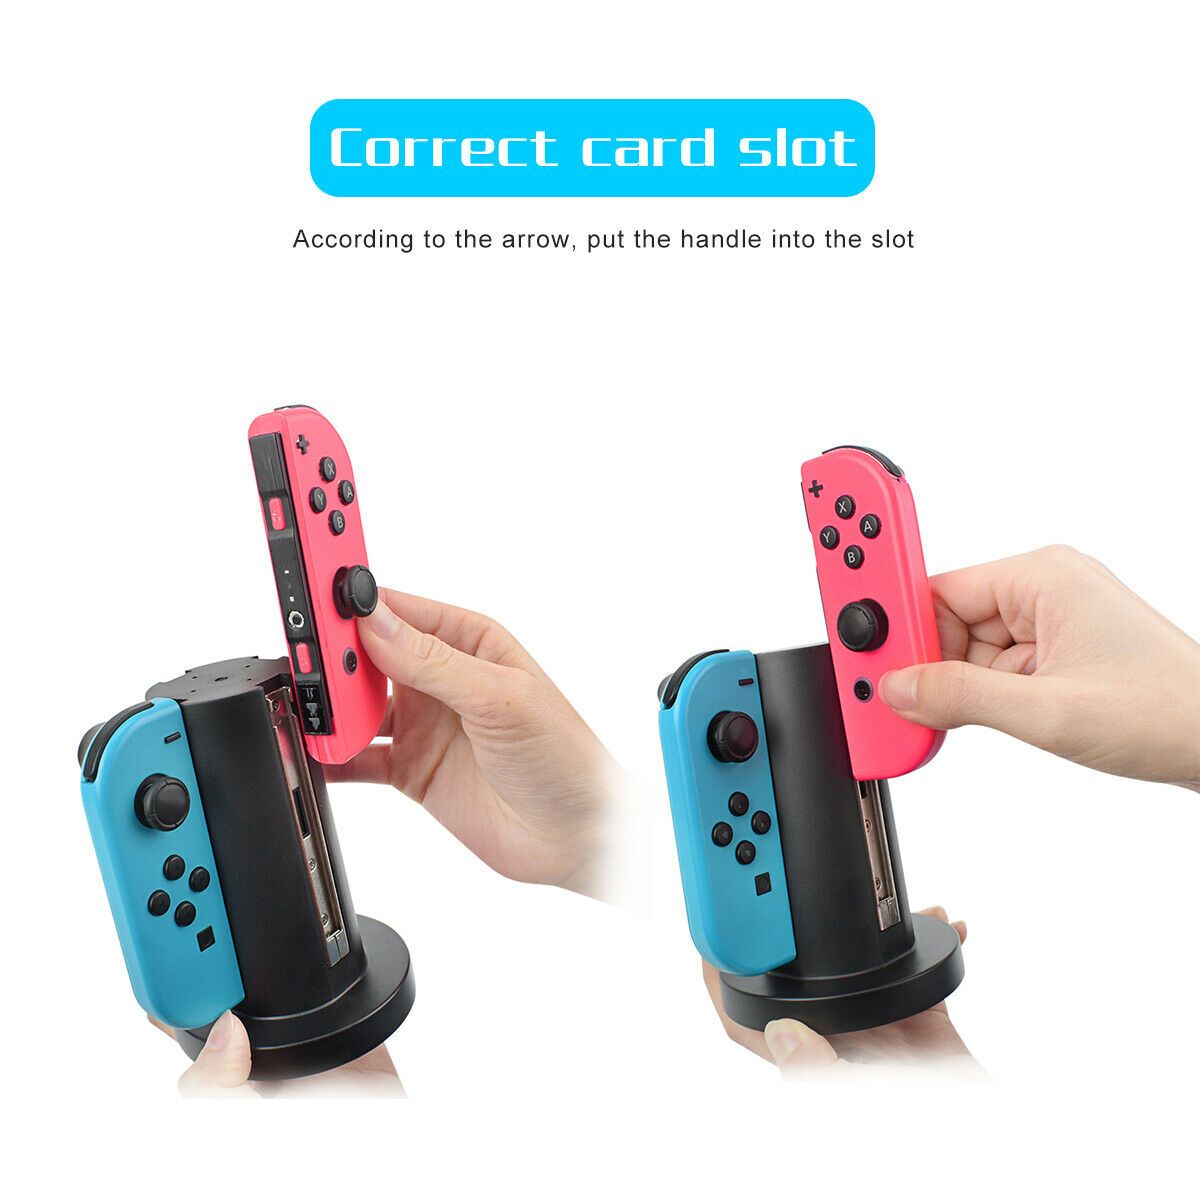 CHARGING STATION JOY CON NINTENDO SWITCH - Easy Video Game